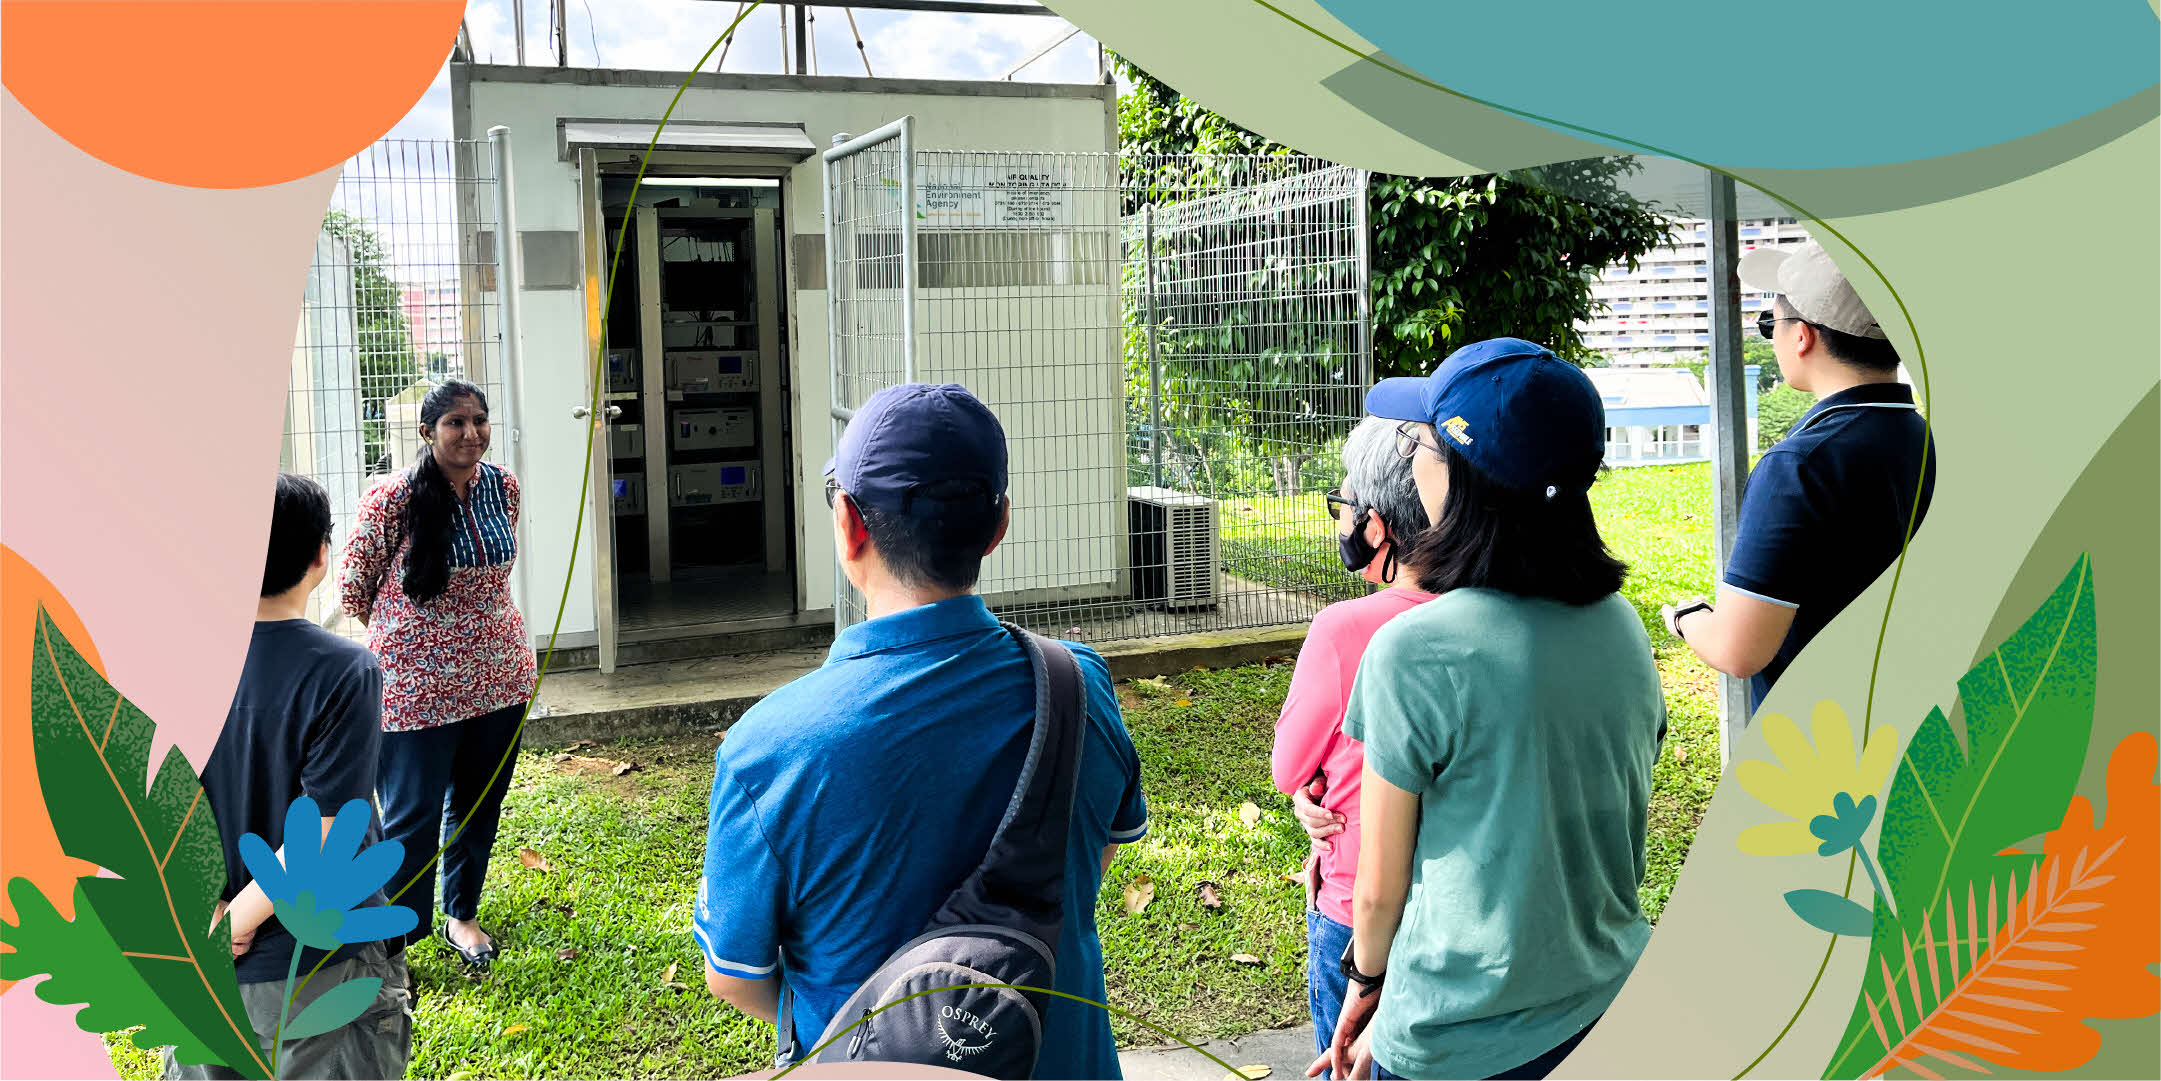 A breath of fresh air: Tour of Singapore’s Ambient Air Quality Monitoring Stations